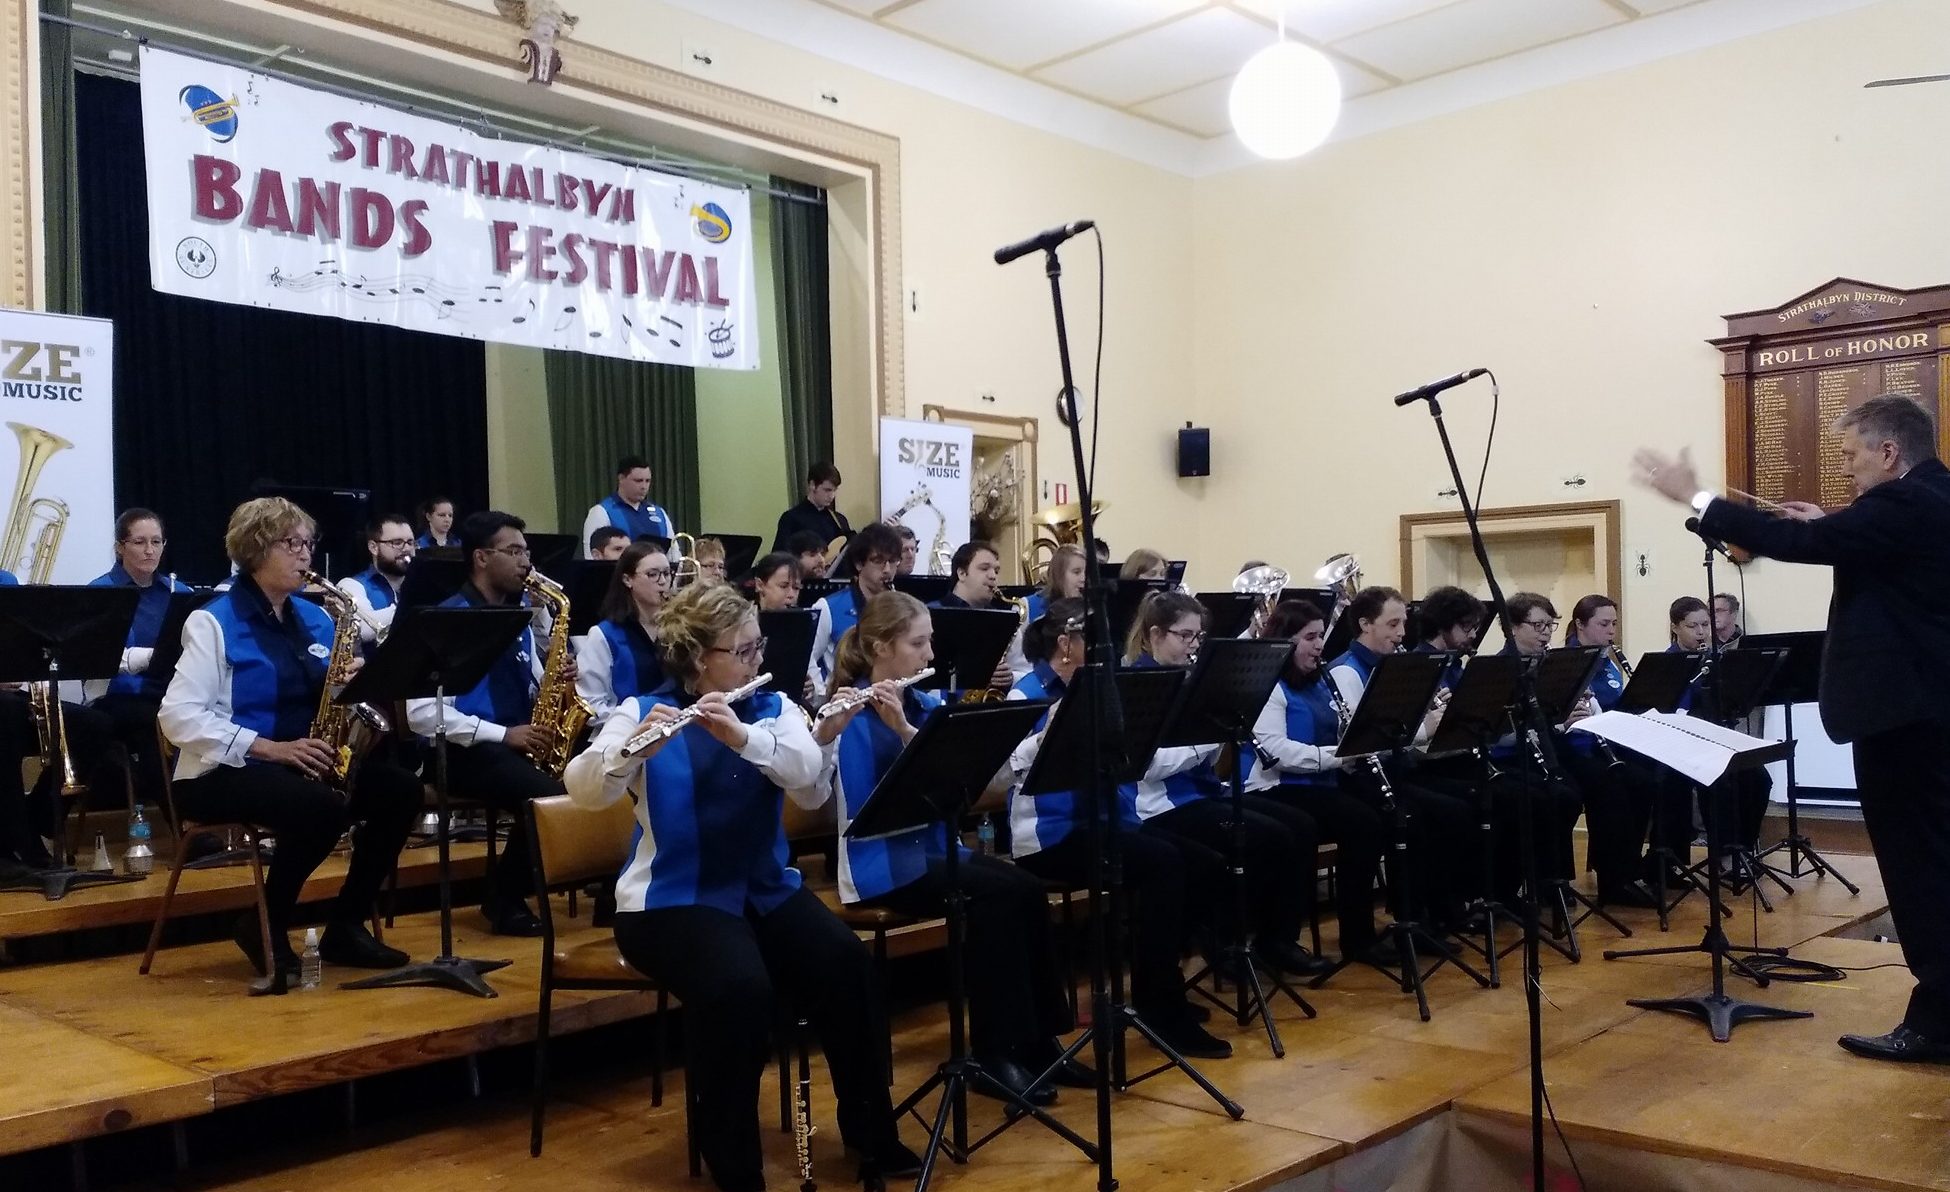 You are currently viewing UCB at the Strathalbyn Band Festival